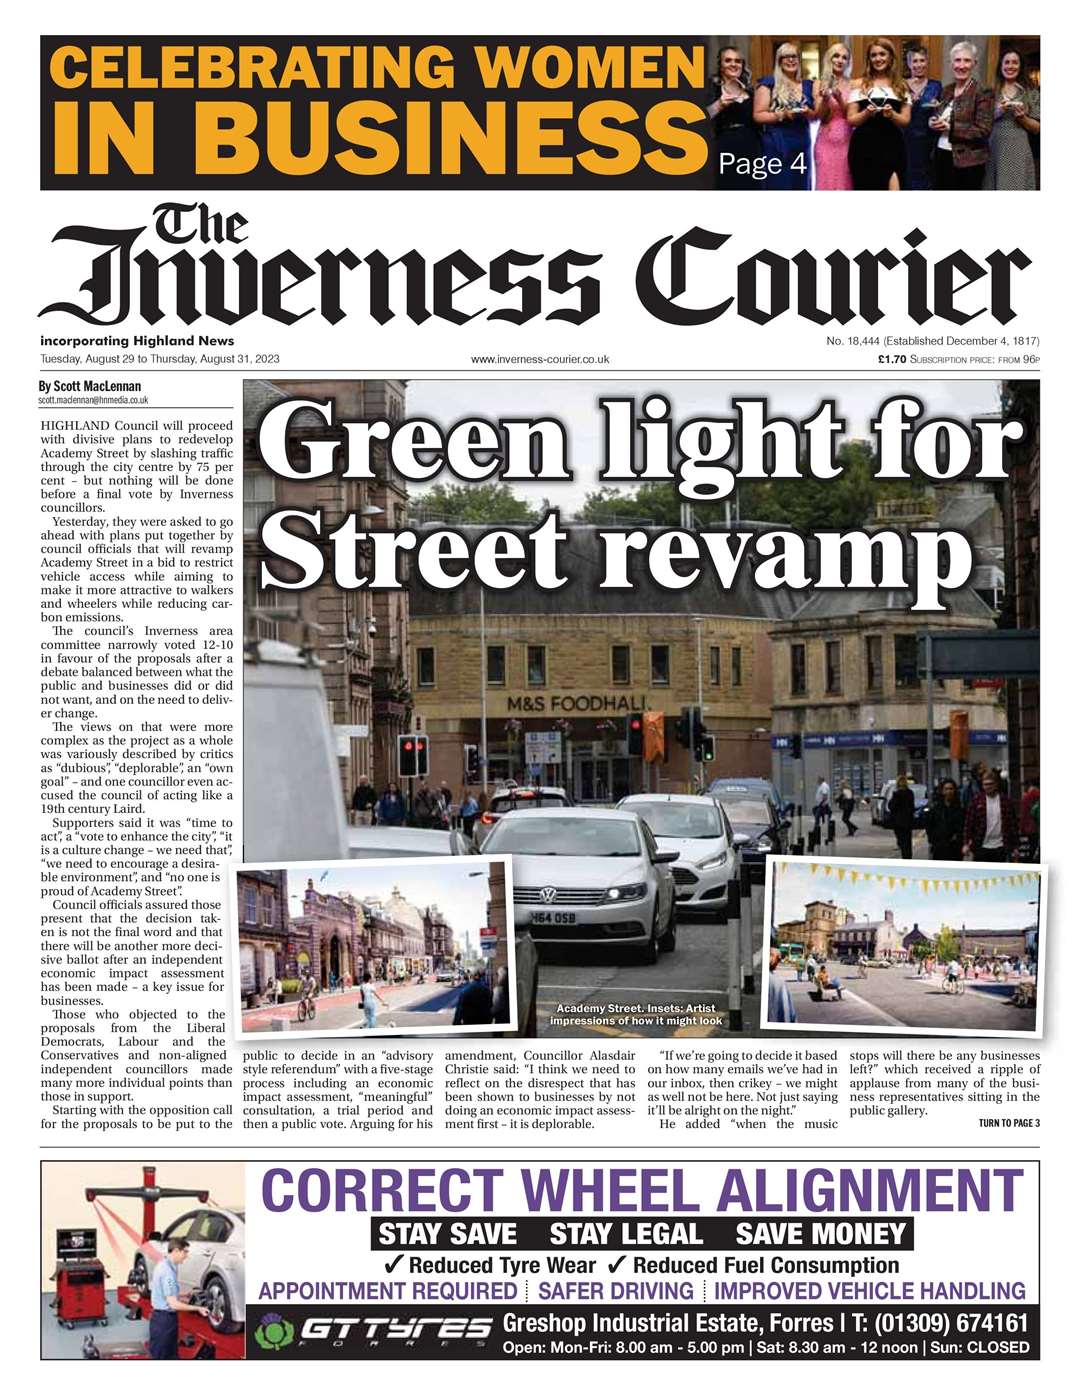 The Inverness Courier, August 29, front page.